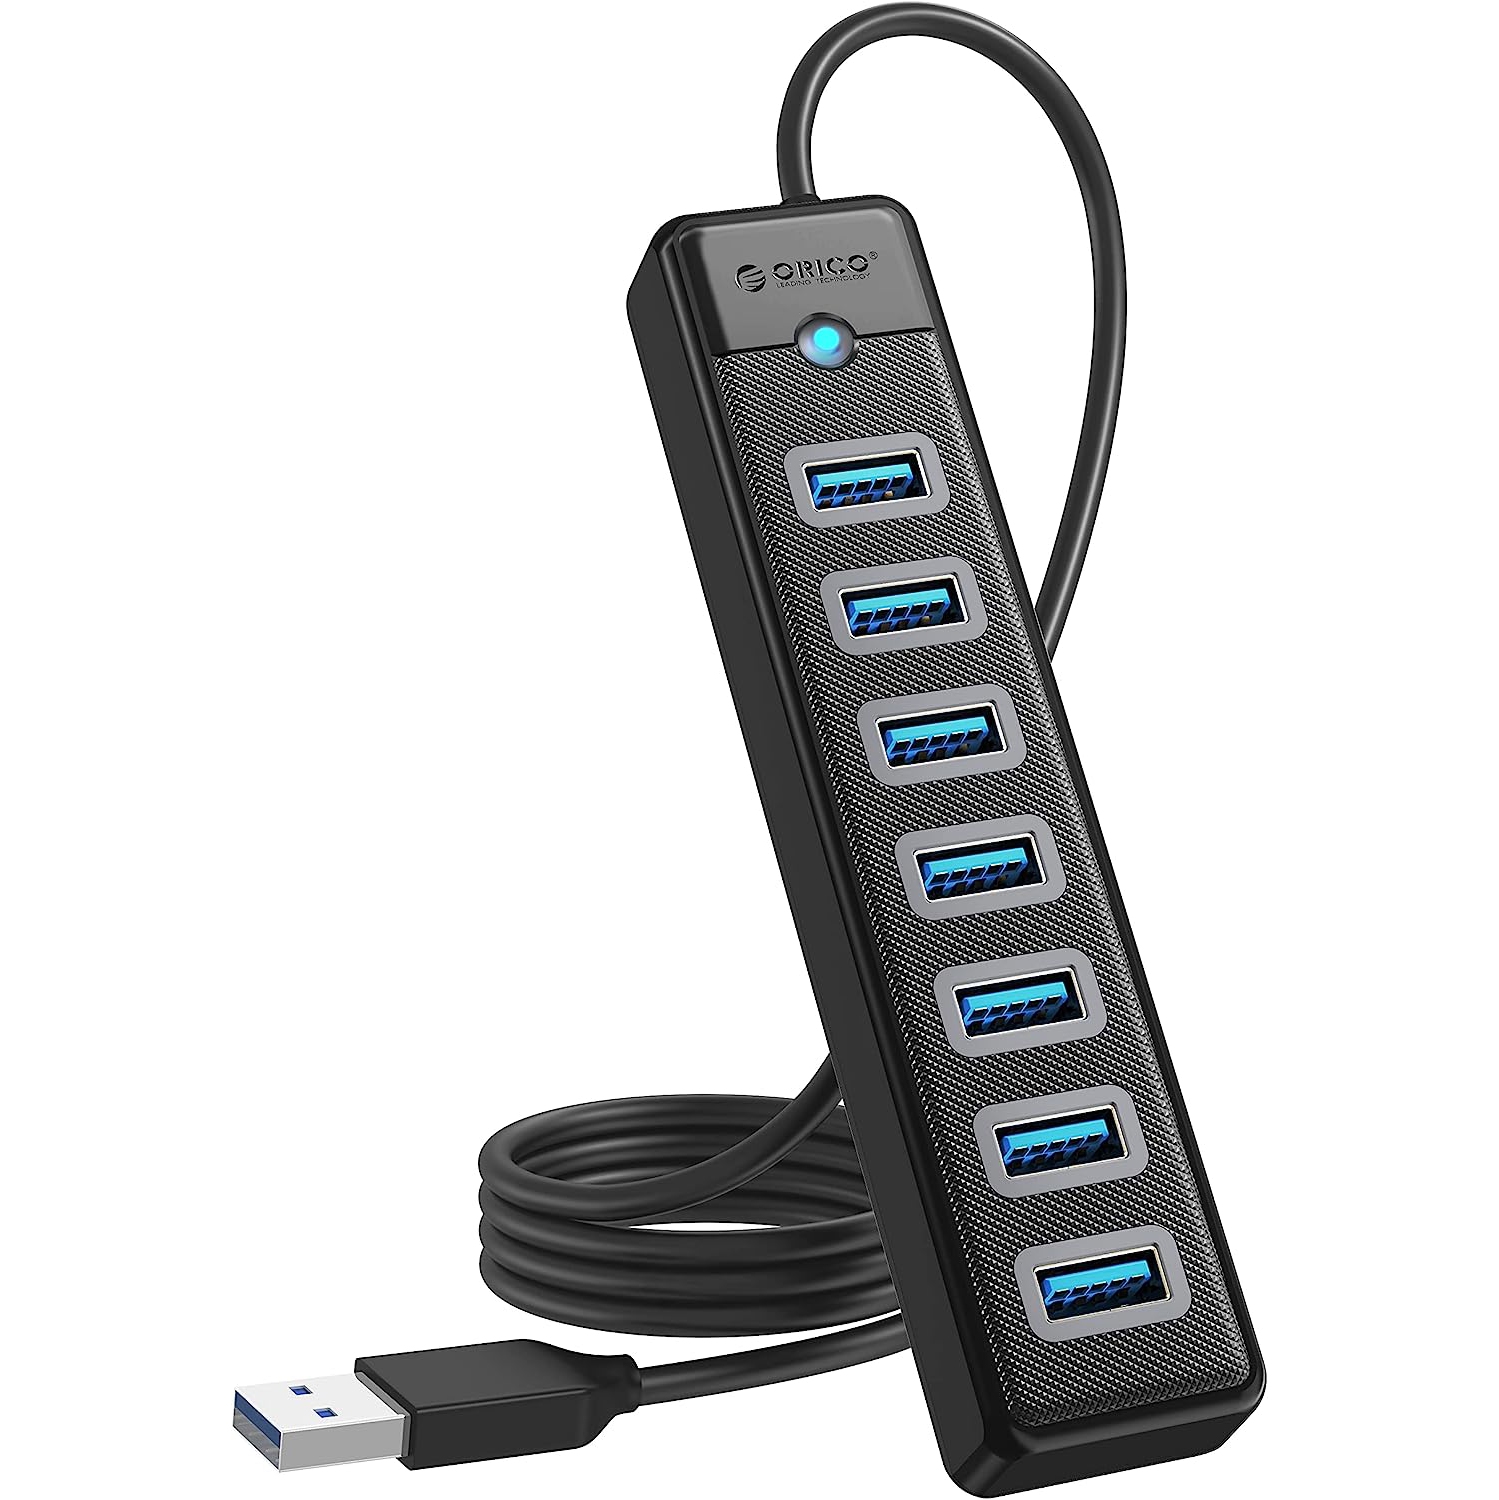 7-Port USB Hub 3.0 with 3.28ft Extension Cable and Tapy-c Charger Port, 5Gbps Fast Data USB Splitter Transfer